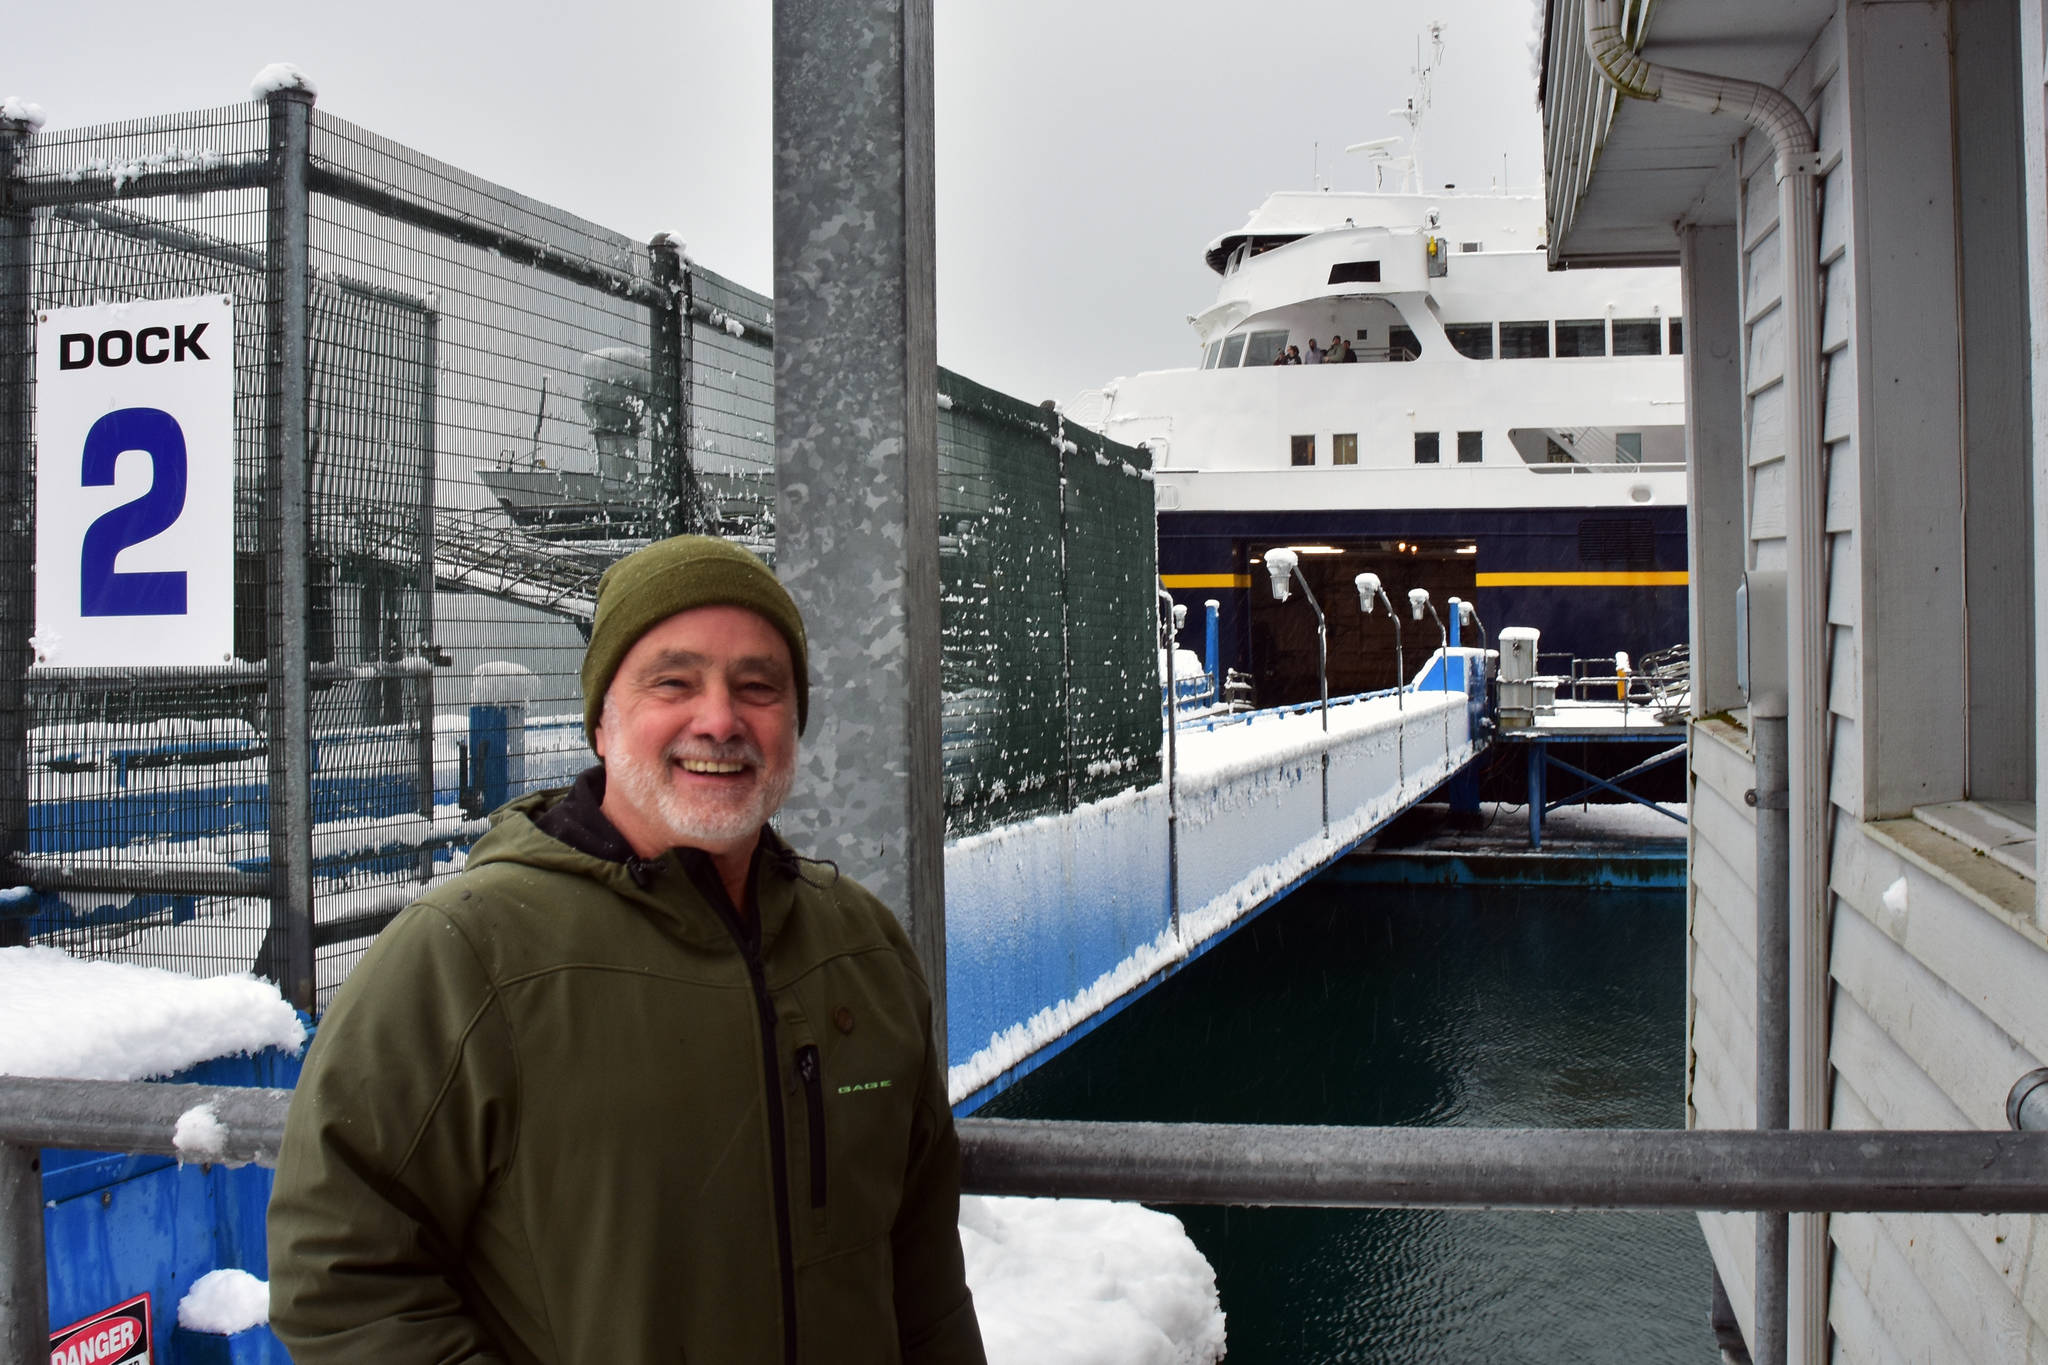 Gerald Stroebele, in front of the FMV Matanuska at Auke Bay Ferry Terminal on Thursday. (Peter Segall | Juneau Empire)